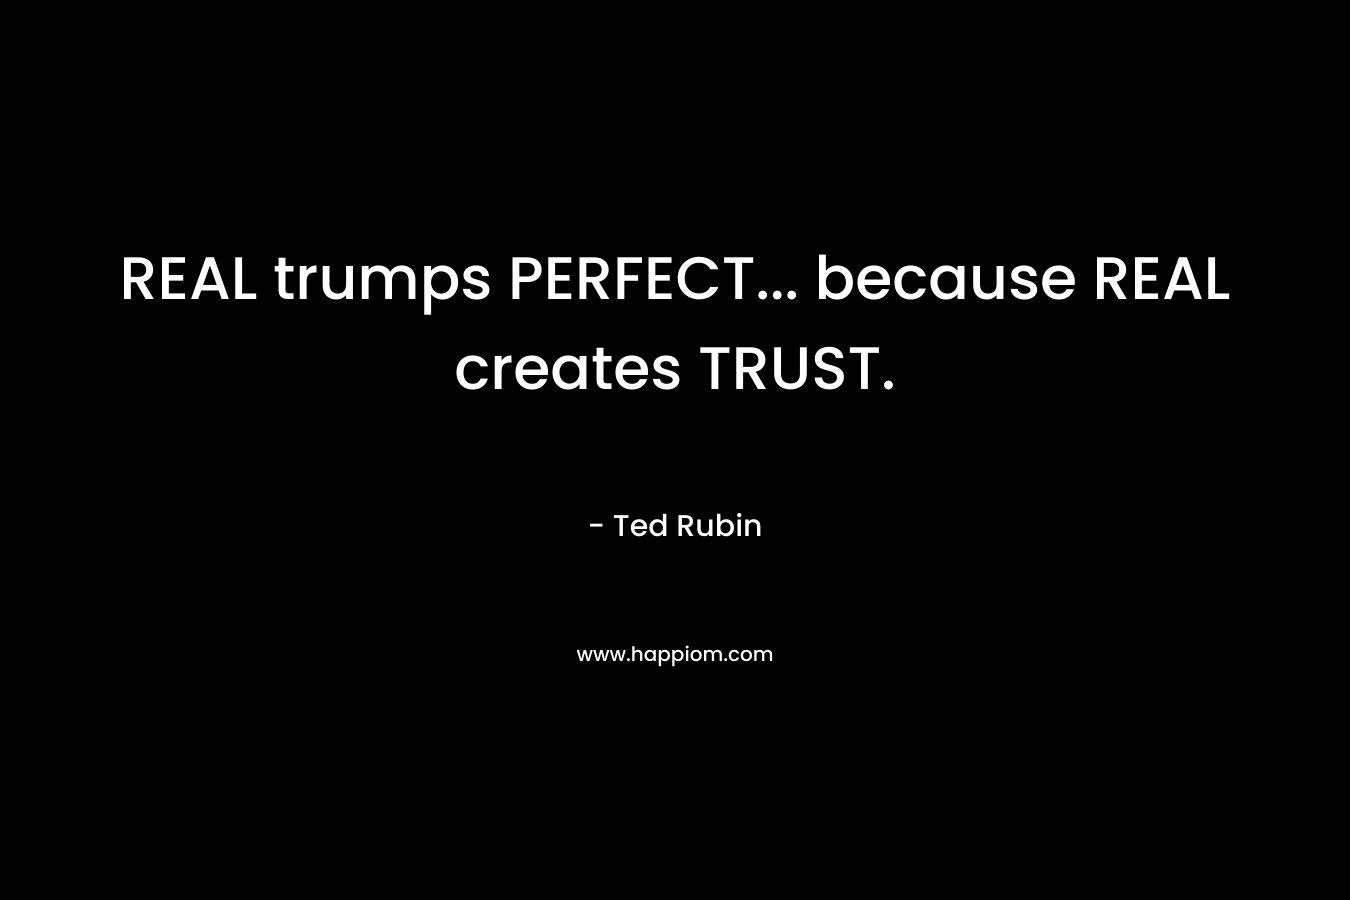 REAL trumps PERFECT... because REAL creates TRUST.